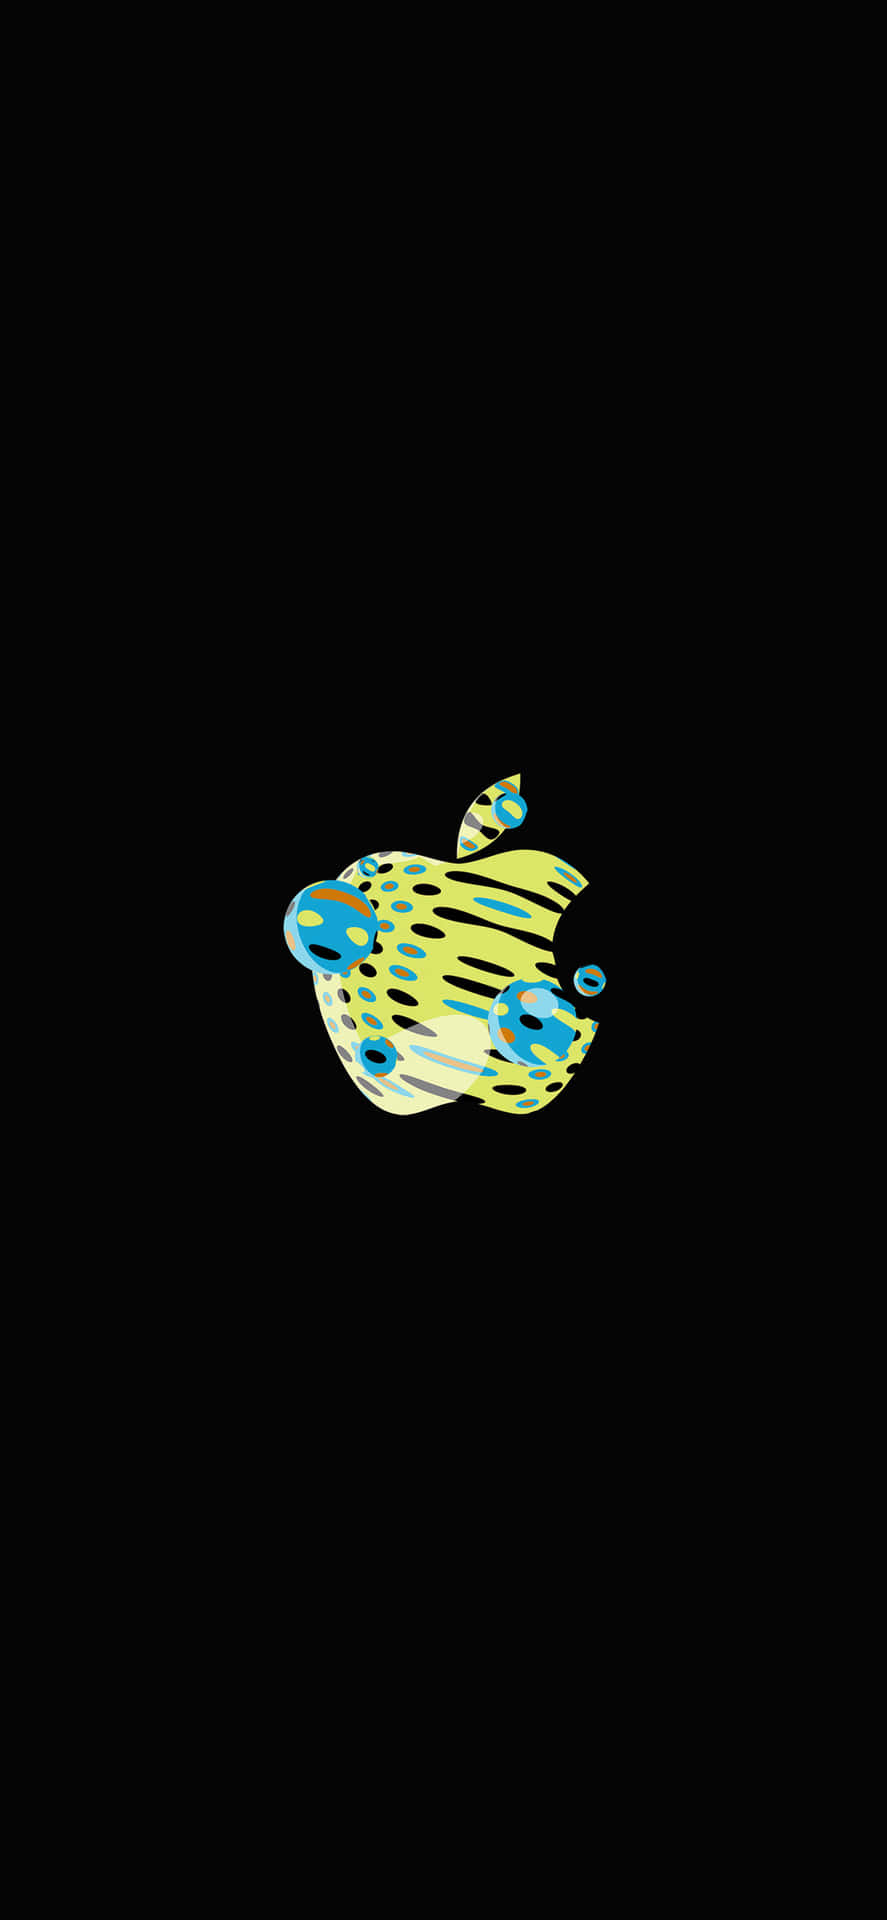 A Black Background With A Yellow And Blue Apple Logo Wallpaper